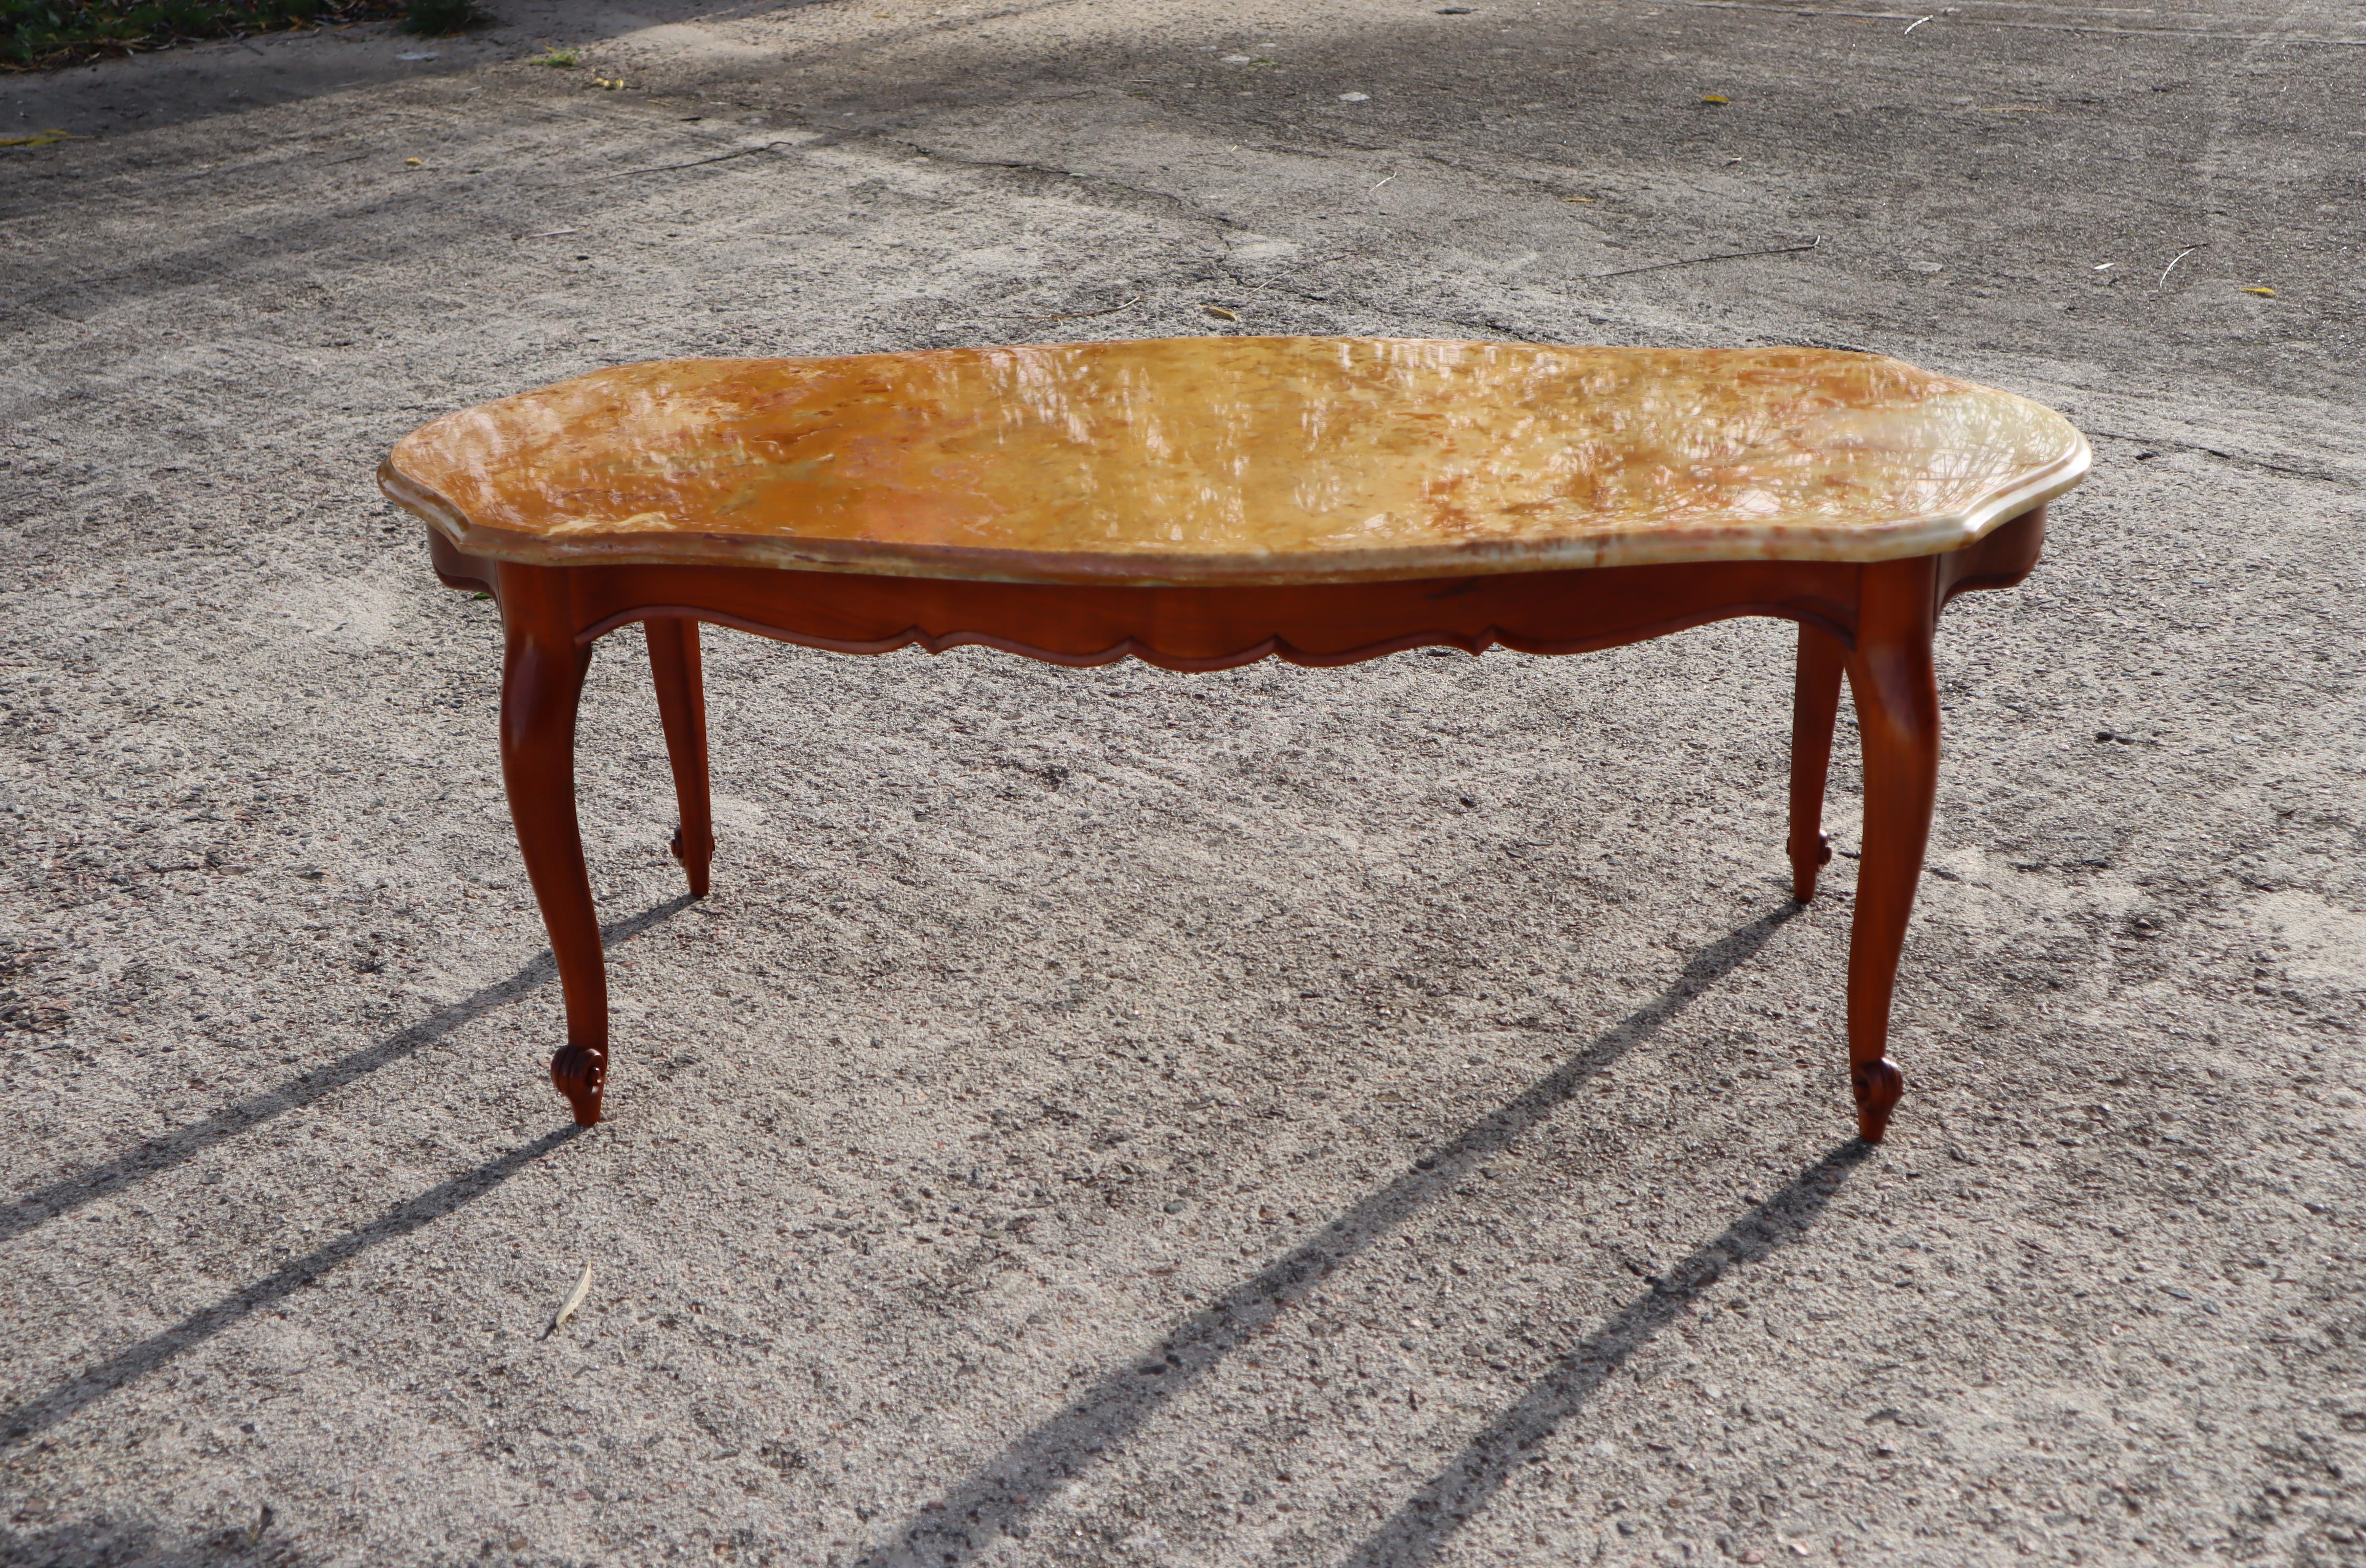 Massive French Vintage Marble - Cherrywood Coffee Table - Vintage Lounge Table - Style Louis XV from the 60s

Massive Marble Top with natural Patterns in beautiful mix of earth colors orange,ochre,beige,brown ,mother-of-pearl

The beautifully